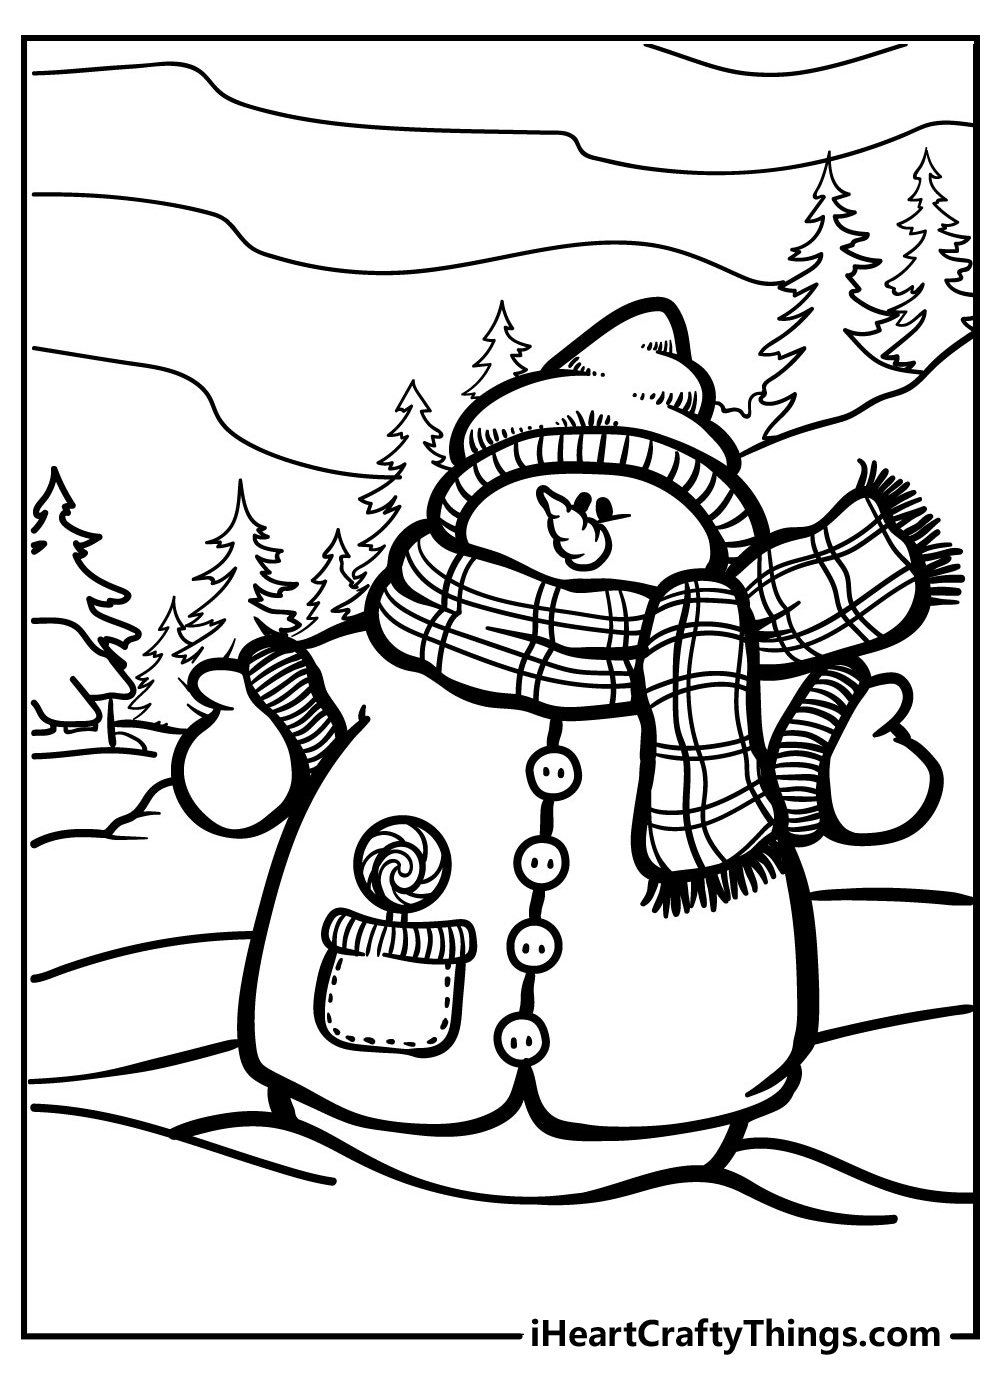 Snowman Coloring Pages Updated 20